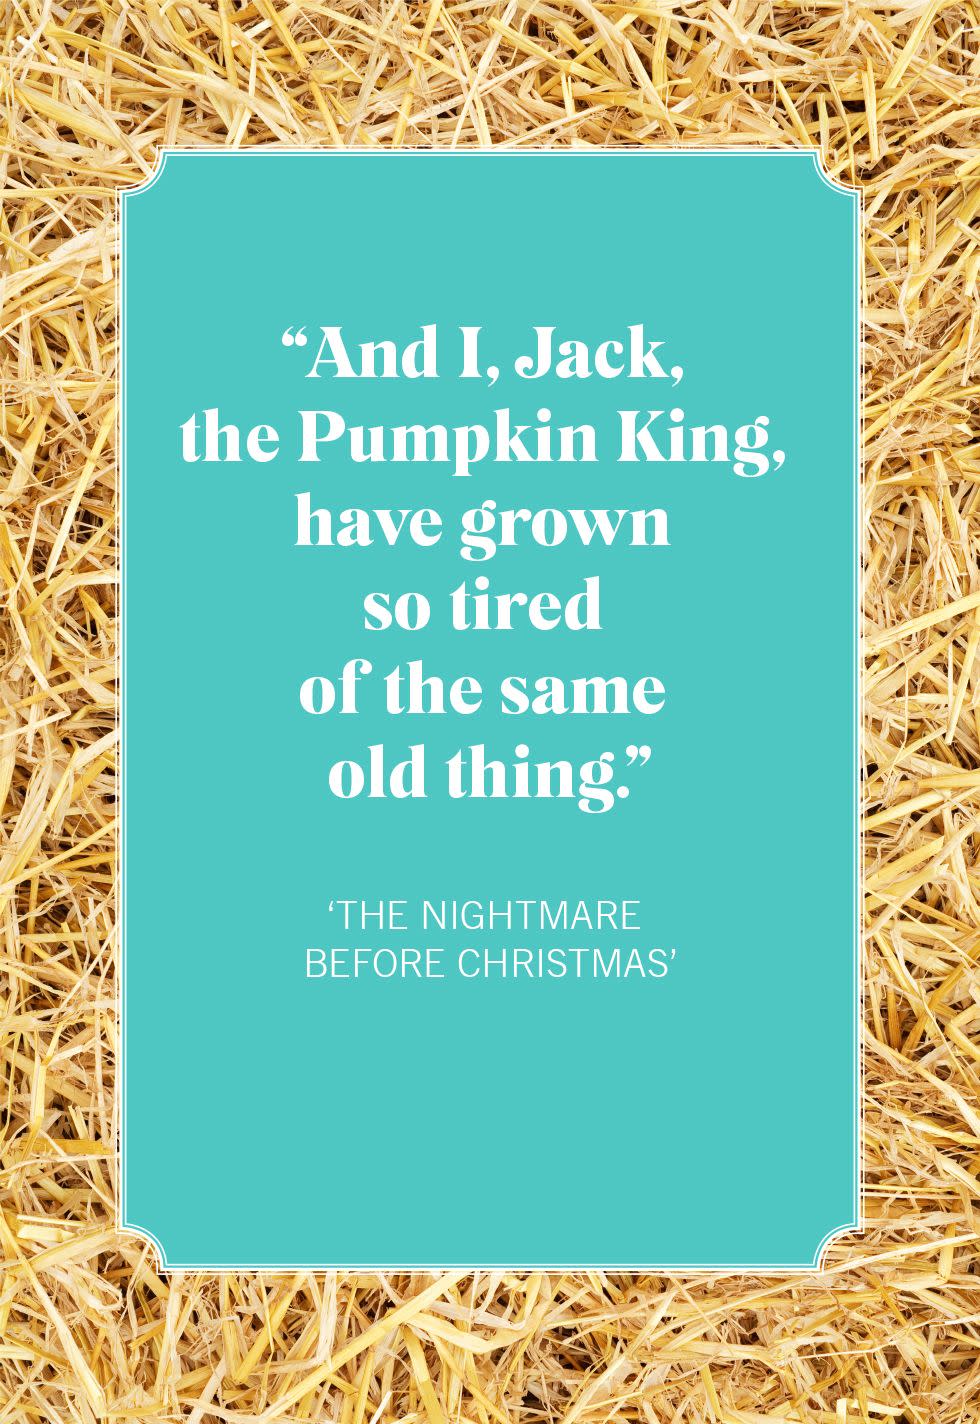 'the nightmare before christmas' pumpkin quotes